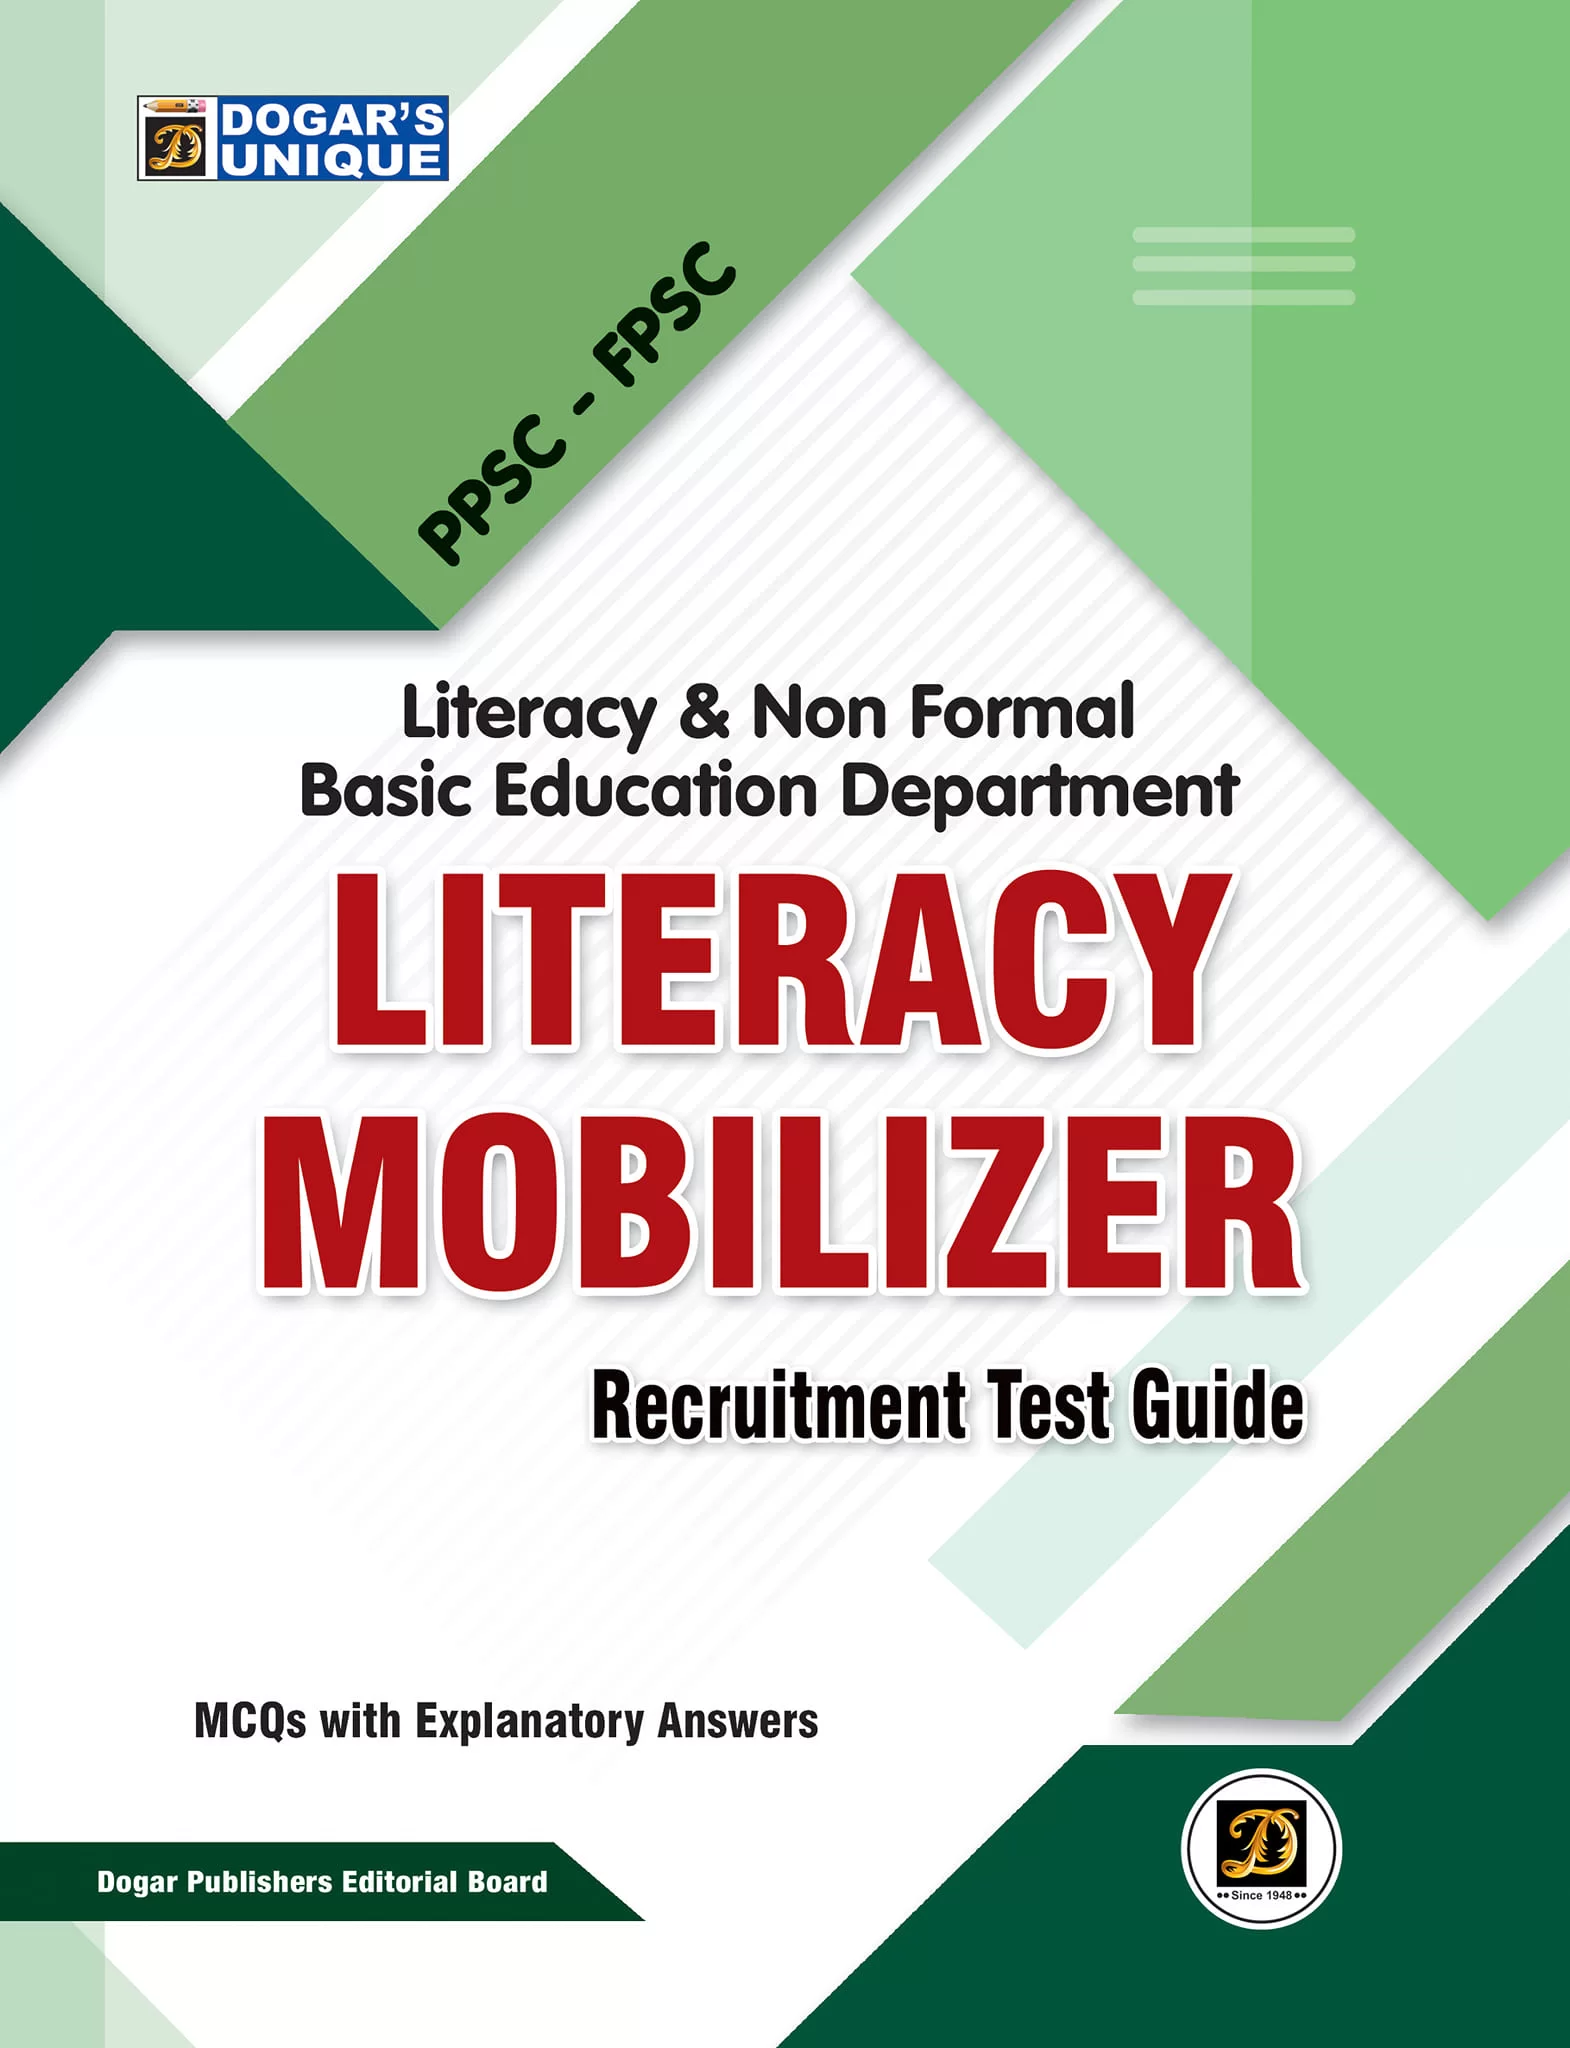 Literacy Mobilizer Recruitment Test Guide pdf book free download